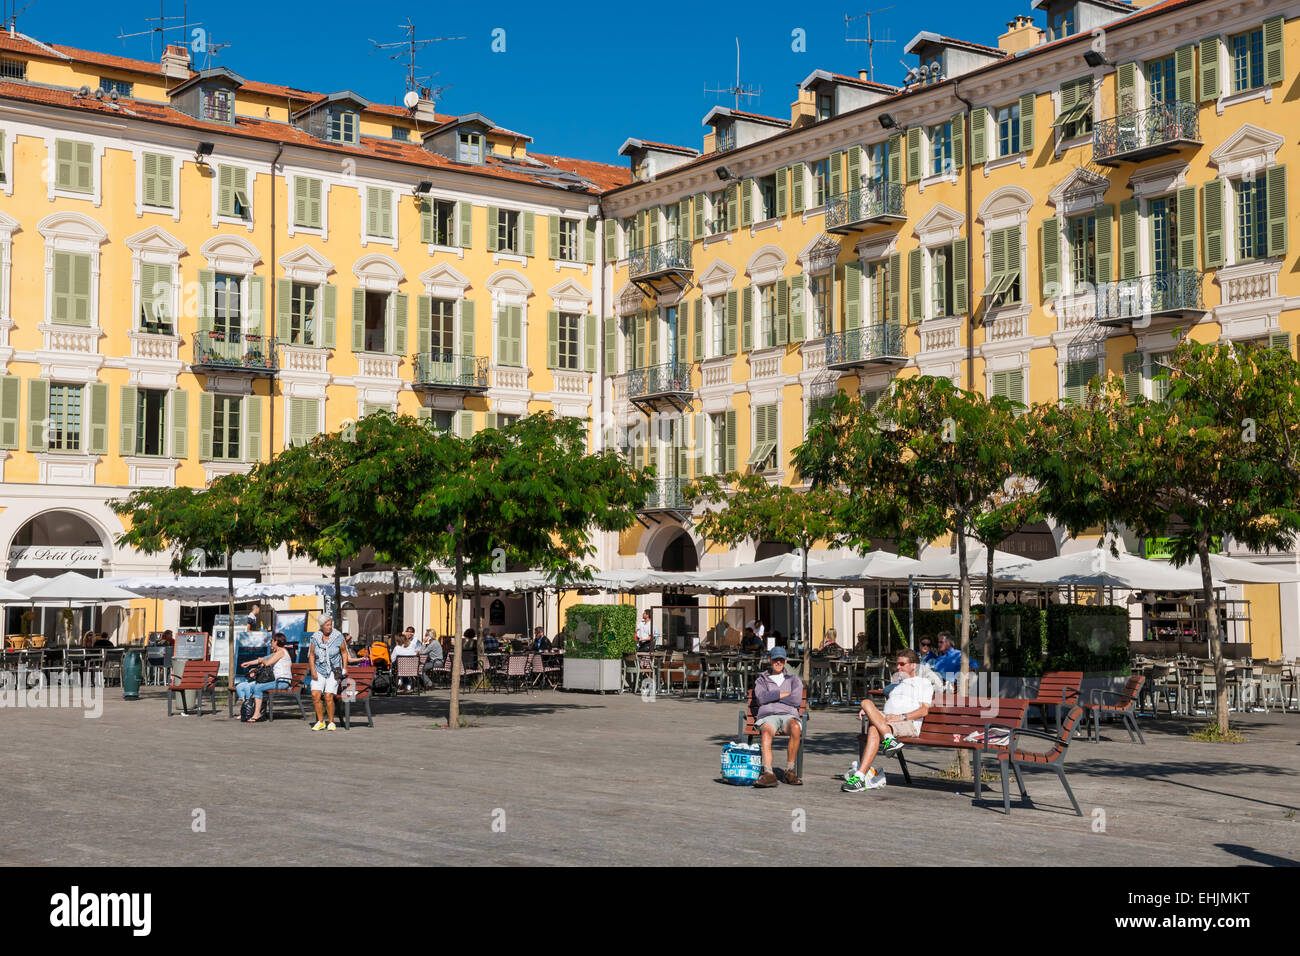 NICE, FRANCE - OCTOBER 2, 2014: Restaurant patios at Place Garibaldi, one of the oldest and largest squares in the city. Stock Photo